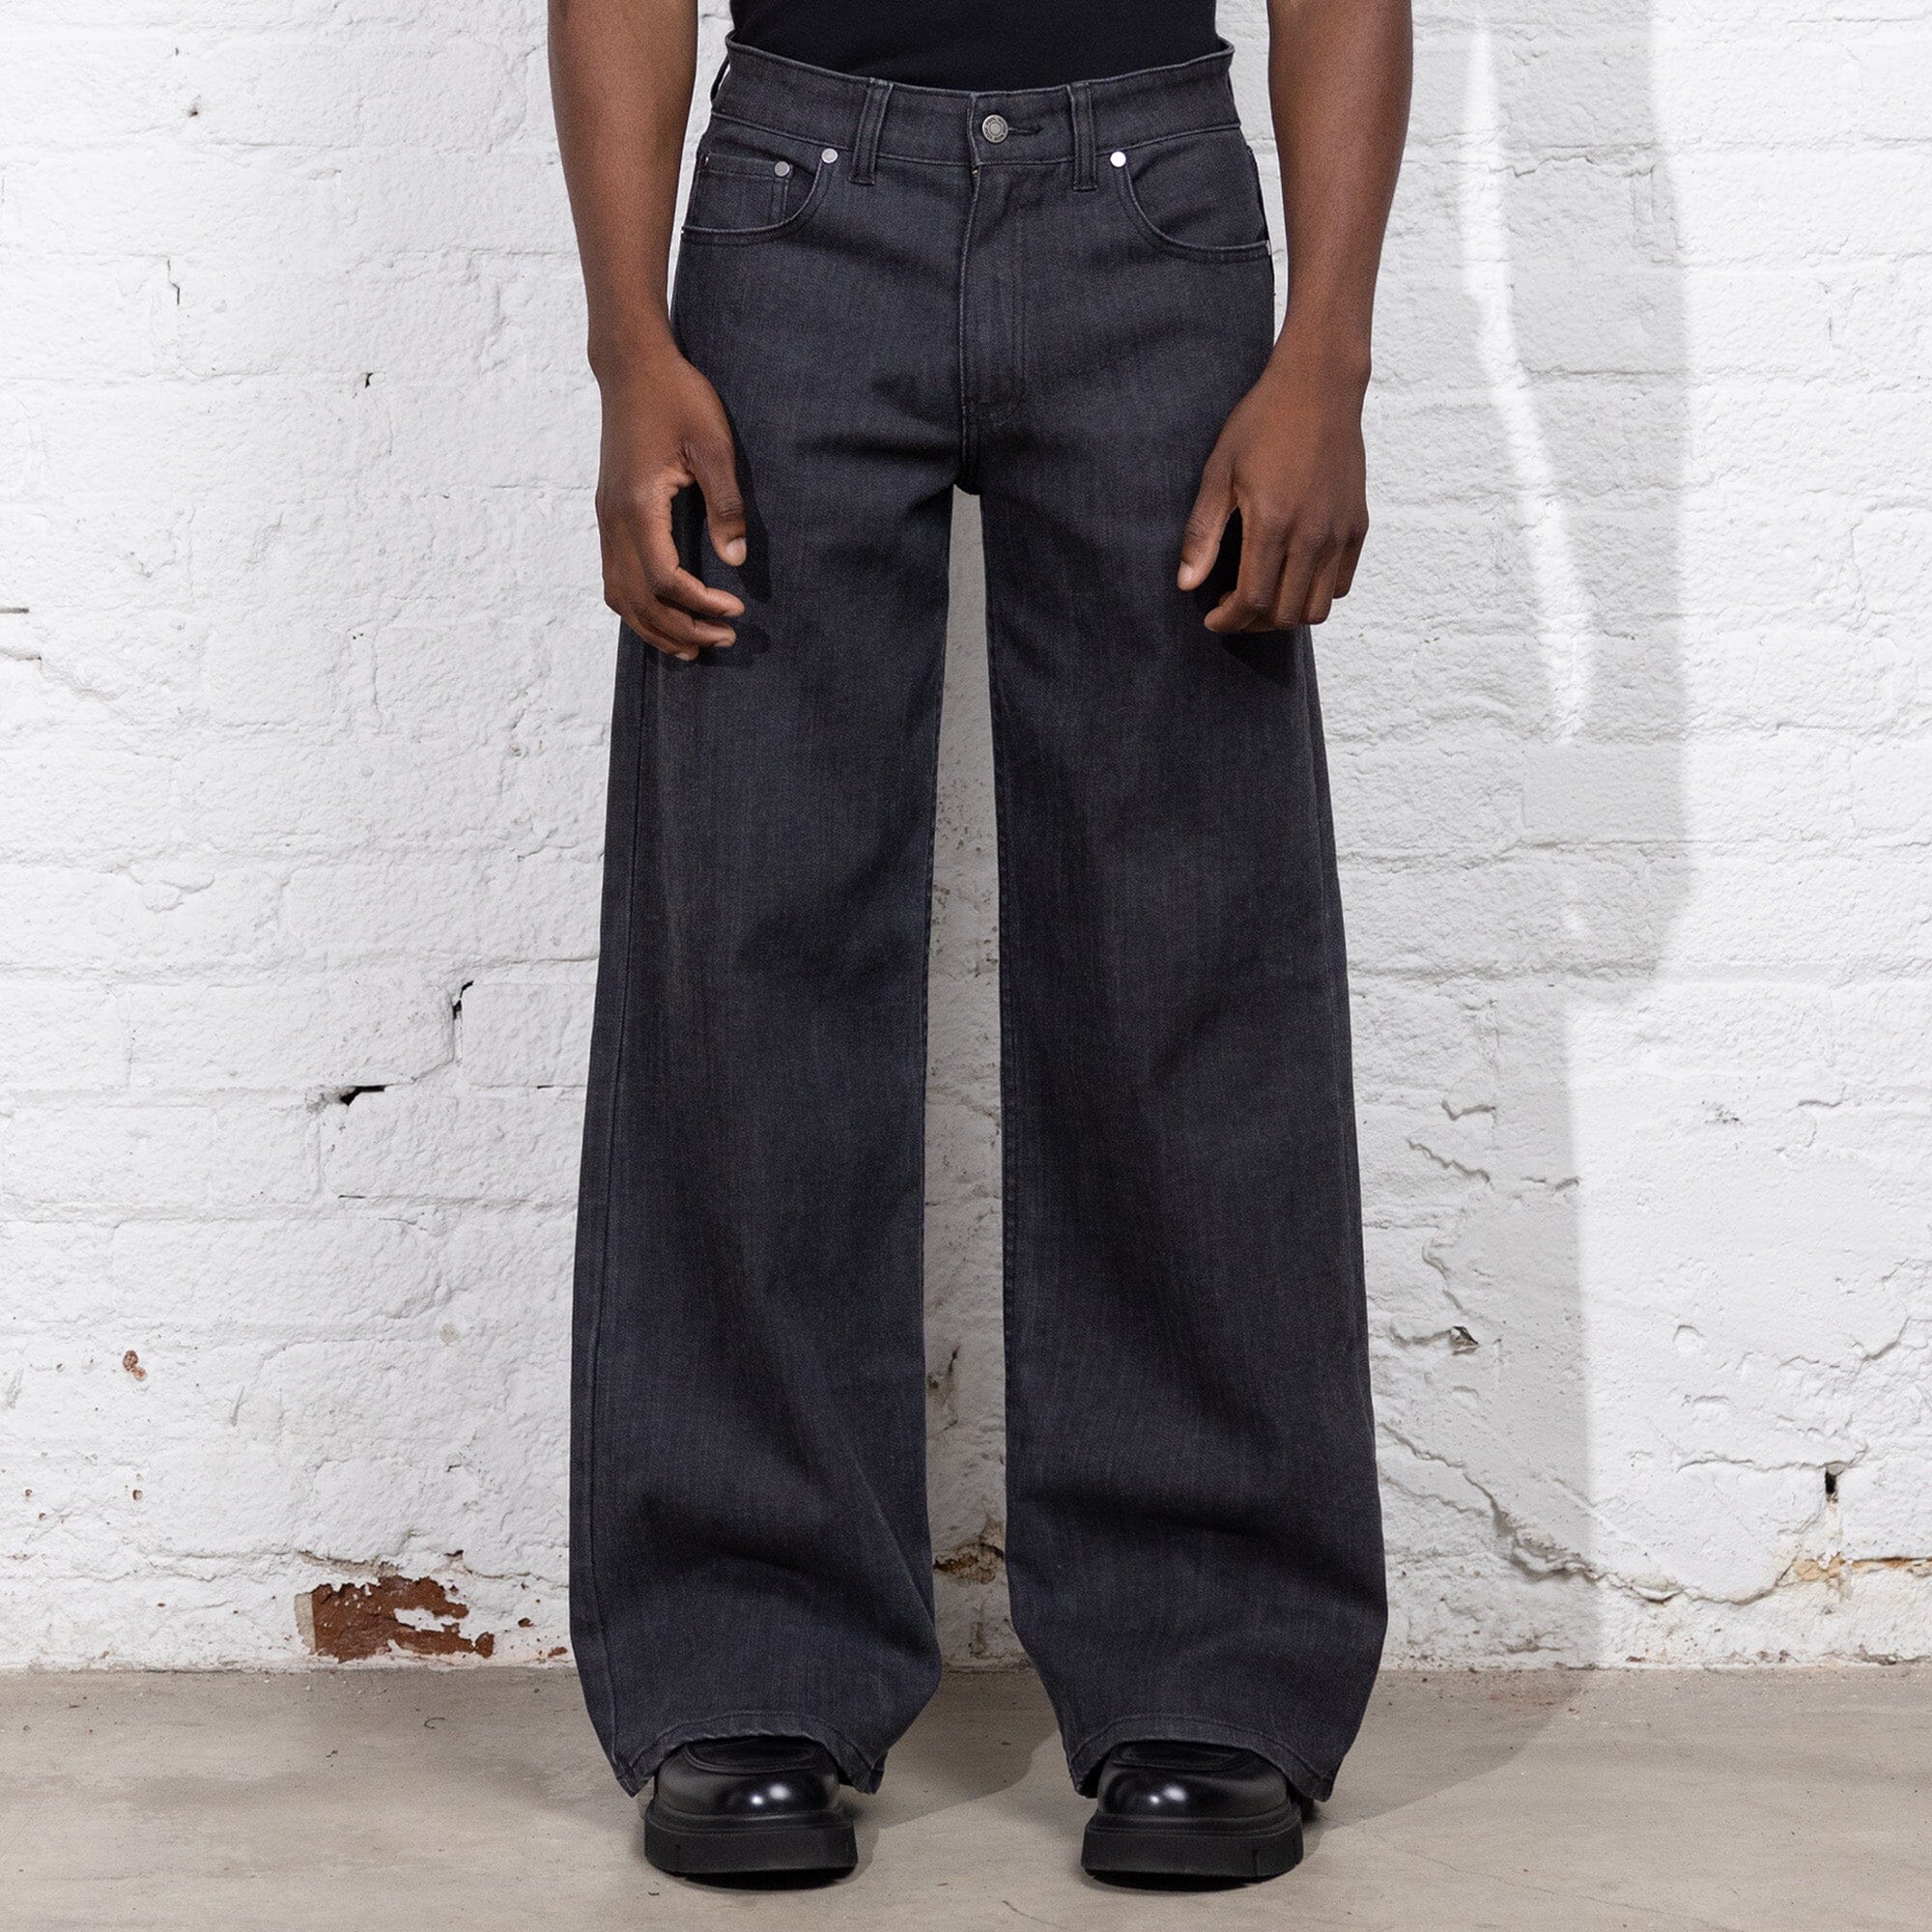 The Tokyo Dad Jeans Washed Black 